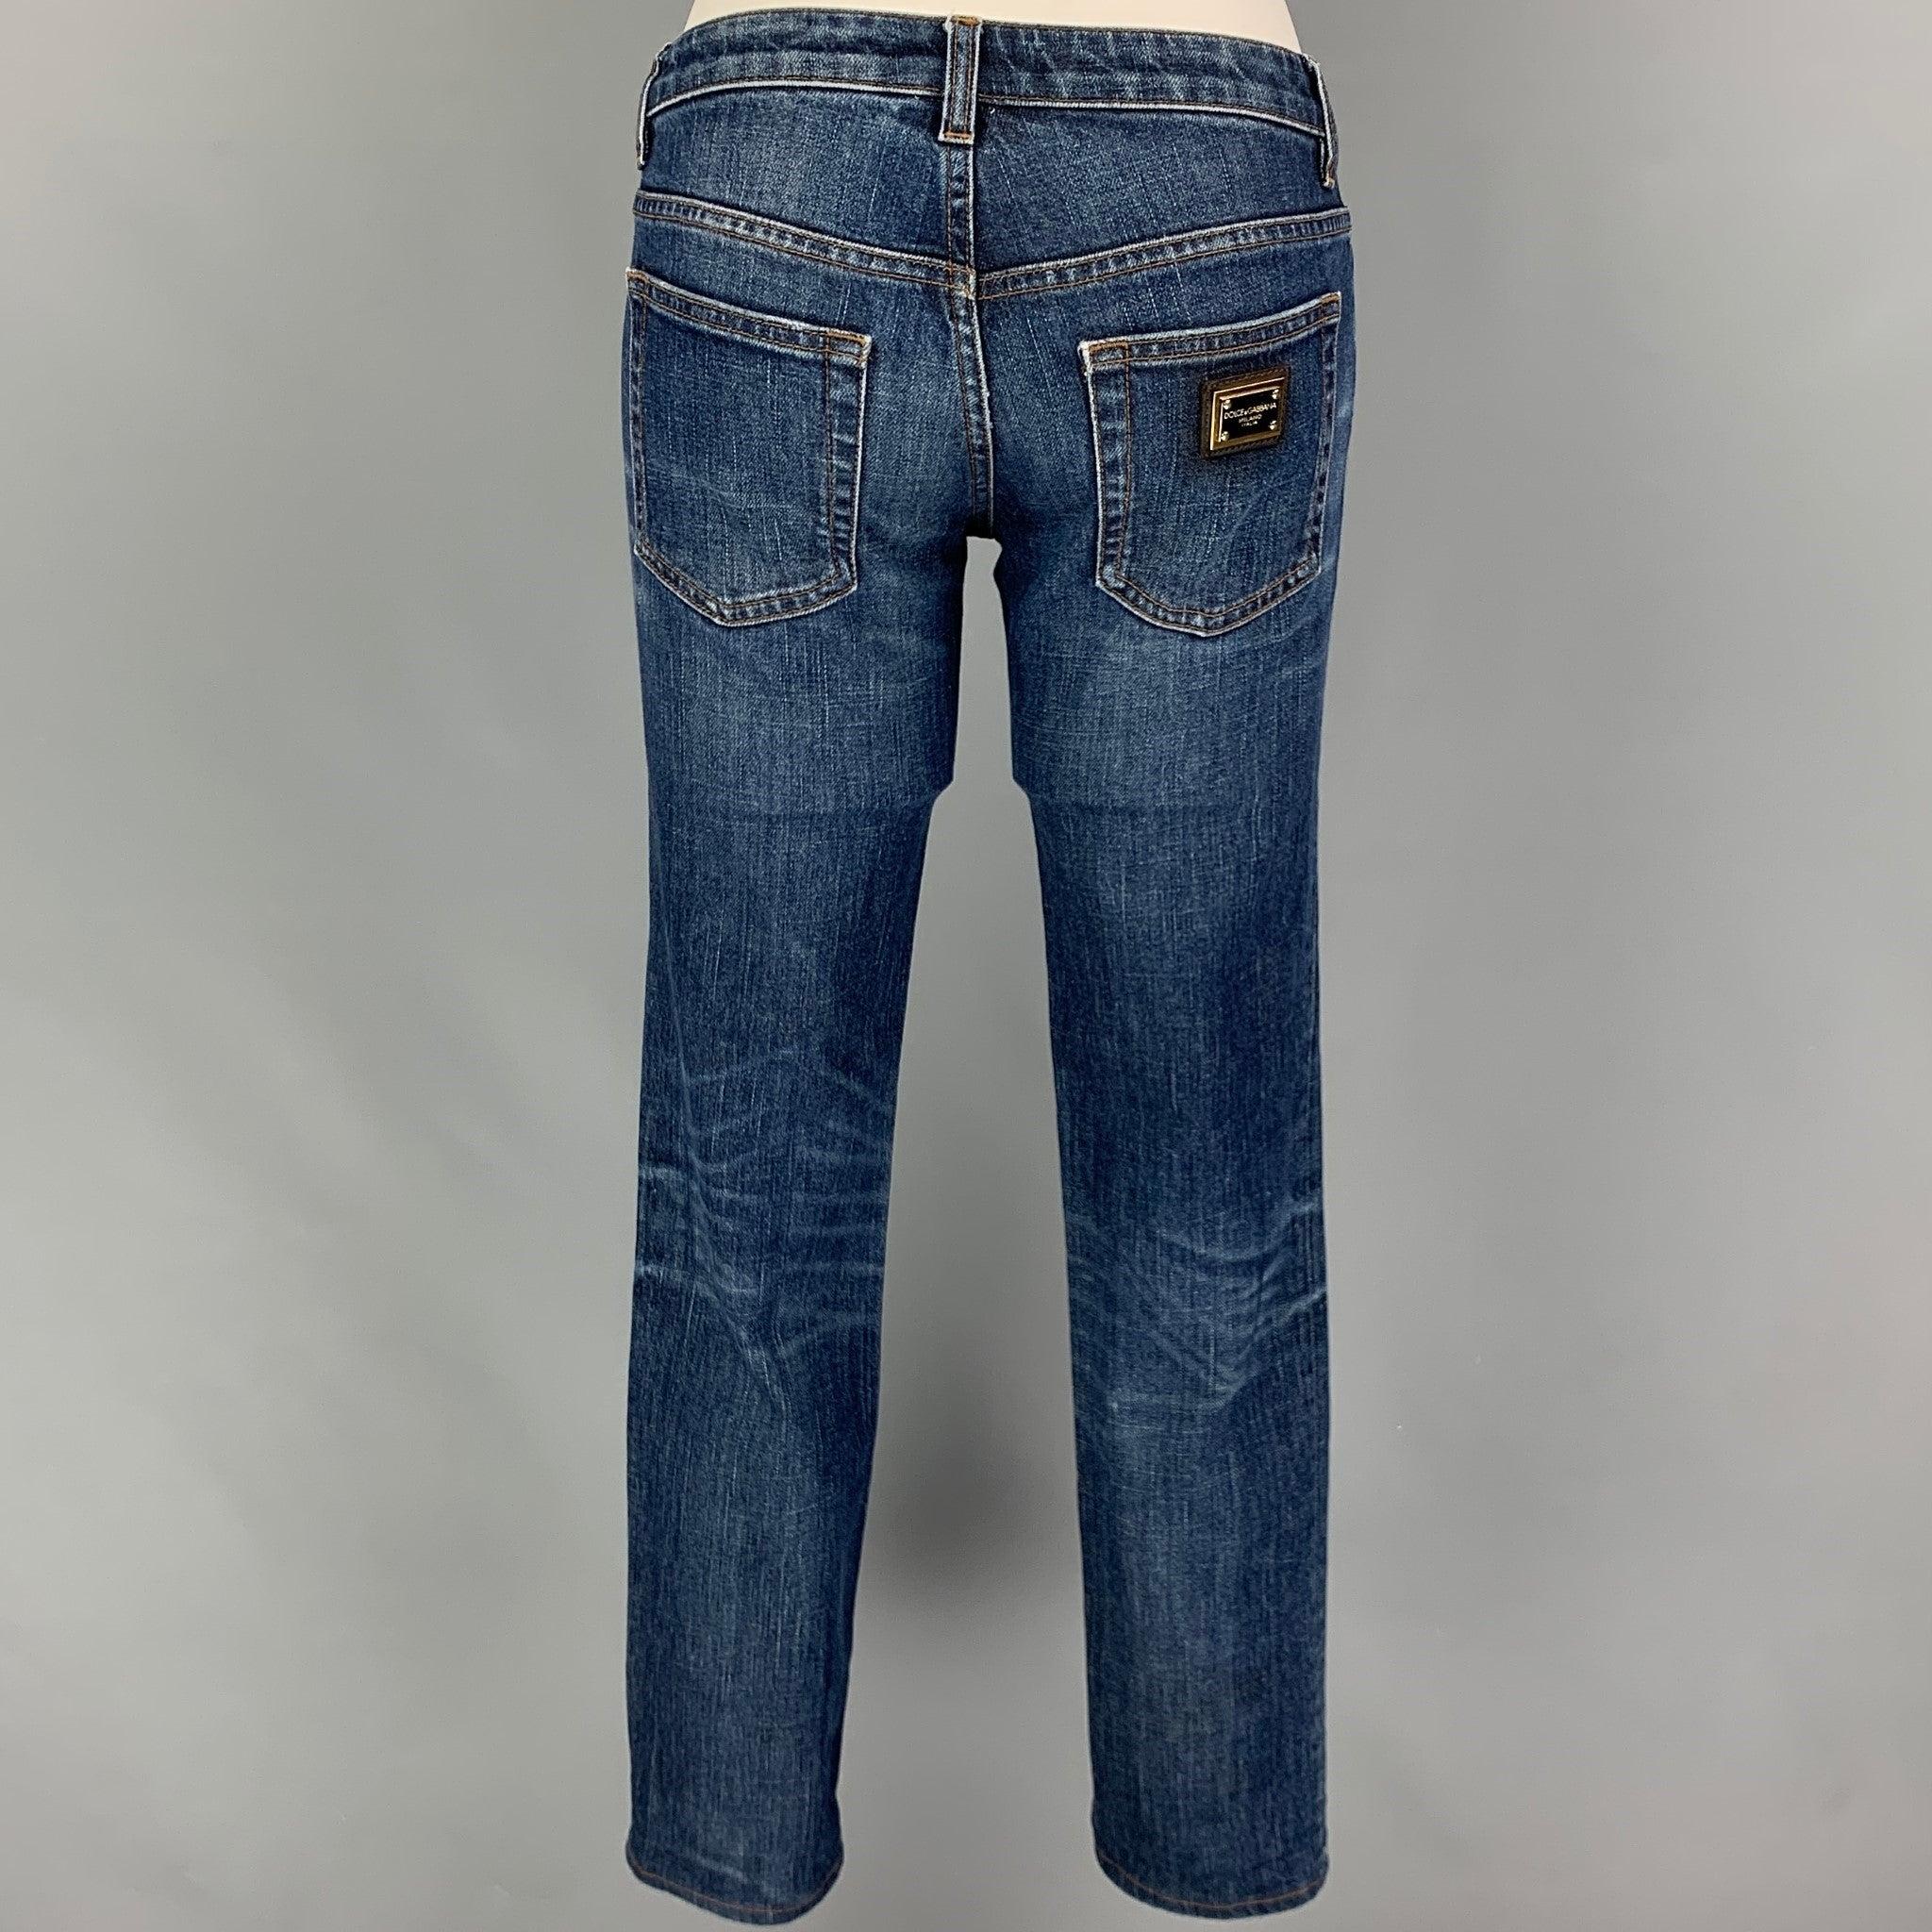 DOLCE & GABBANA jeans comes in a blue washed cotton featuring a skinny fit, contrast stitching, and a zip fly closure. Made in Italy.
Very Good
Pre-Owned Condition. 

Marked:   36 

Measurements: 
  Waist: 28 inches  
Rise: 6.5 inches  Inseam: 31